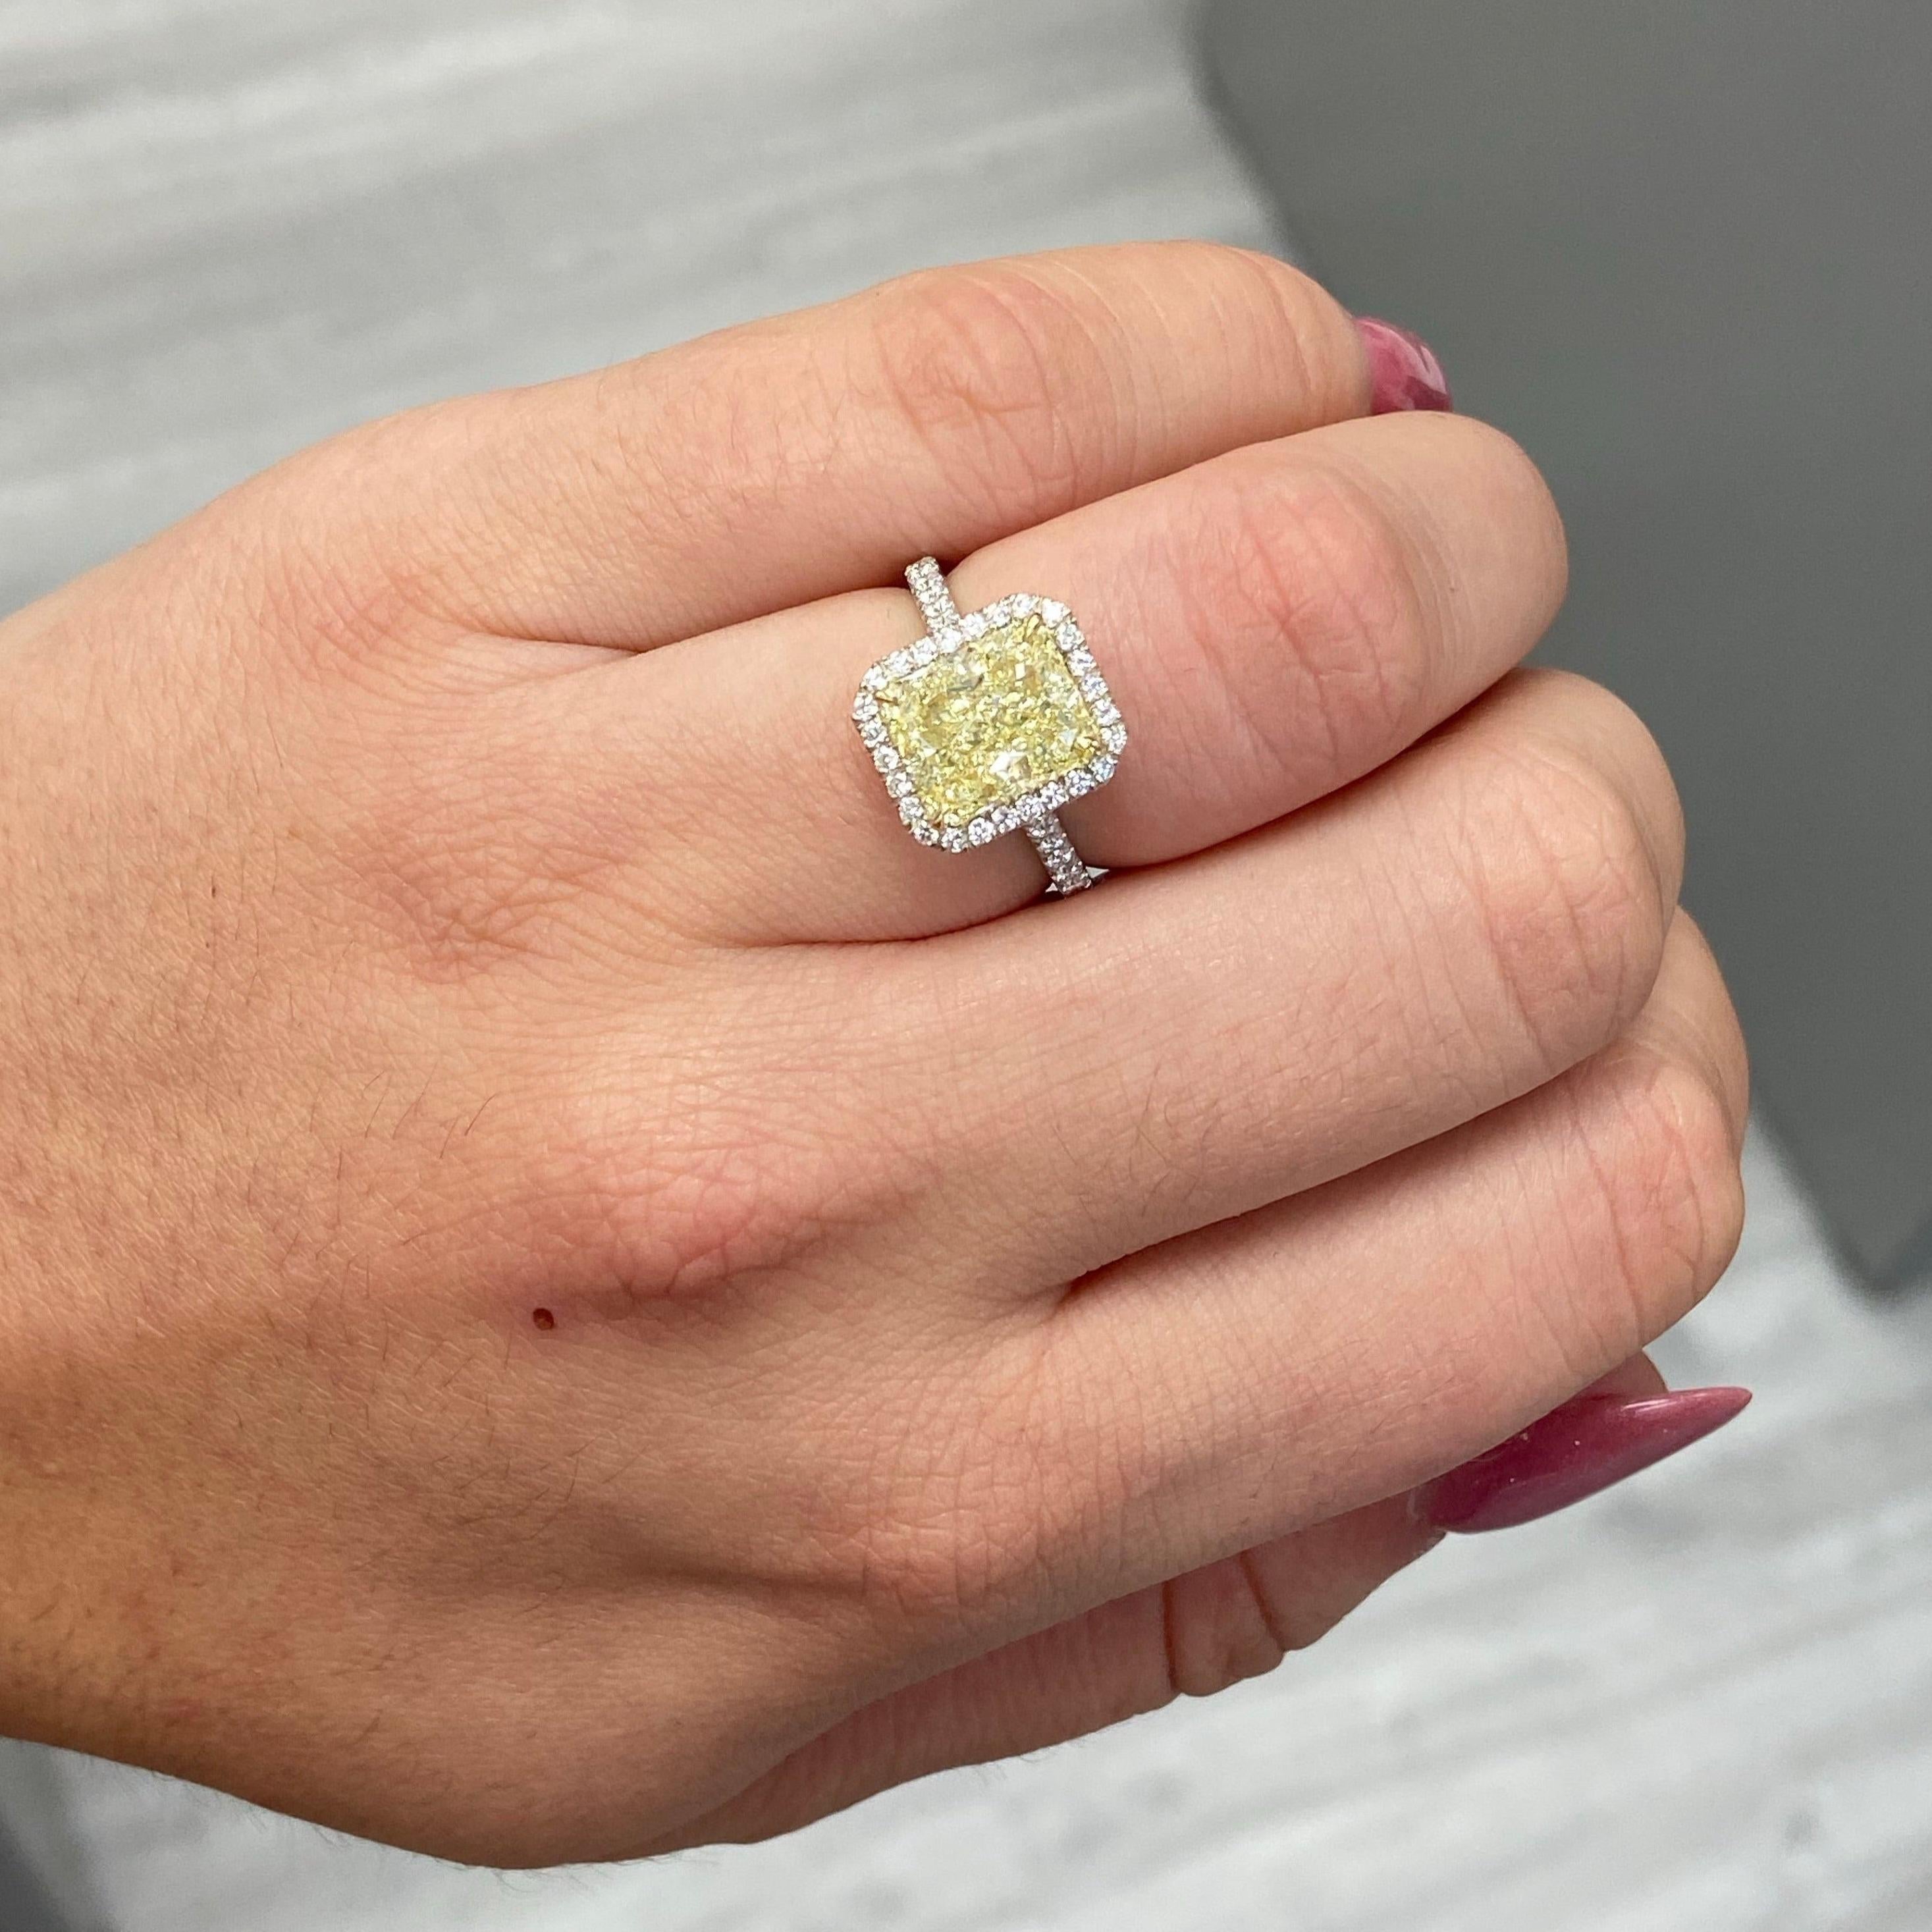 Vibrant and lively 3.50 Carat 
GIA WX 
Radiant Cut
VS2 Clarity 
Surrounded by .65 Carats of White Rounds
Handmade in NYC 
Set in Platinum
Size 6.5
